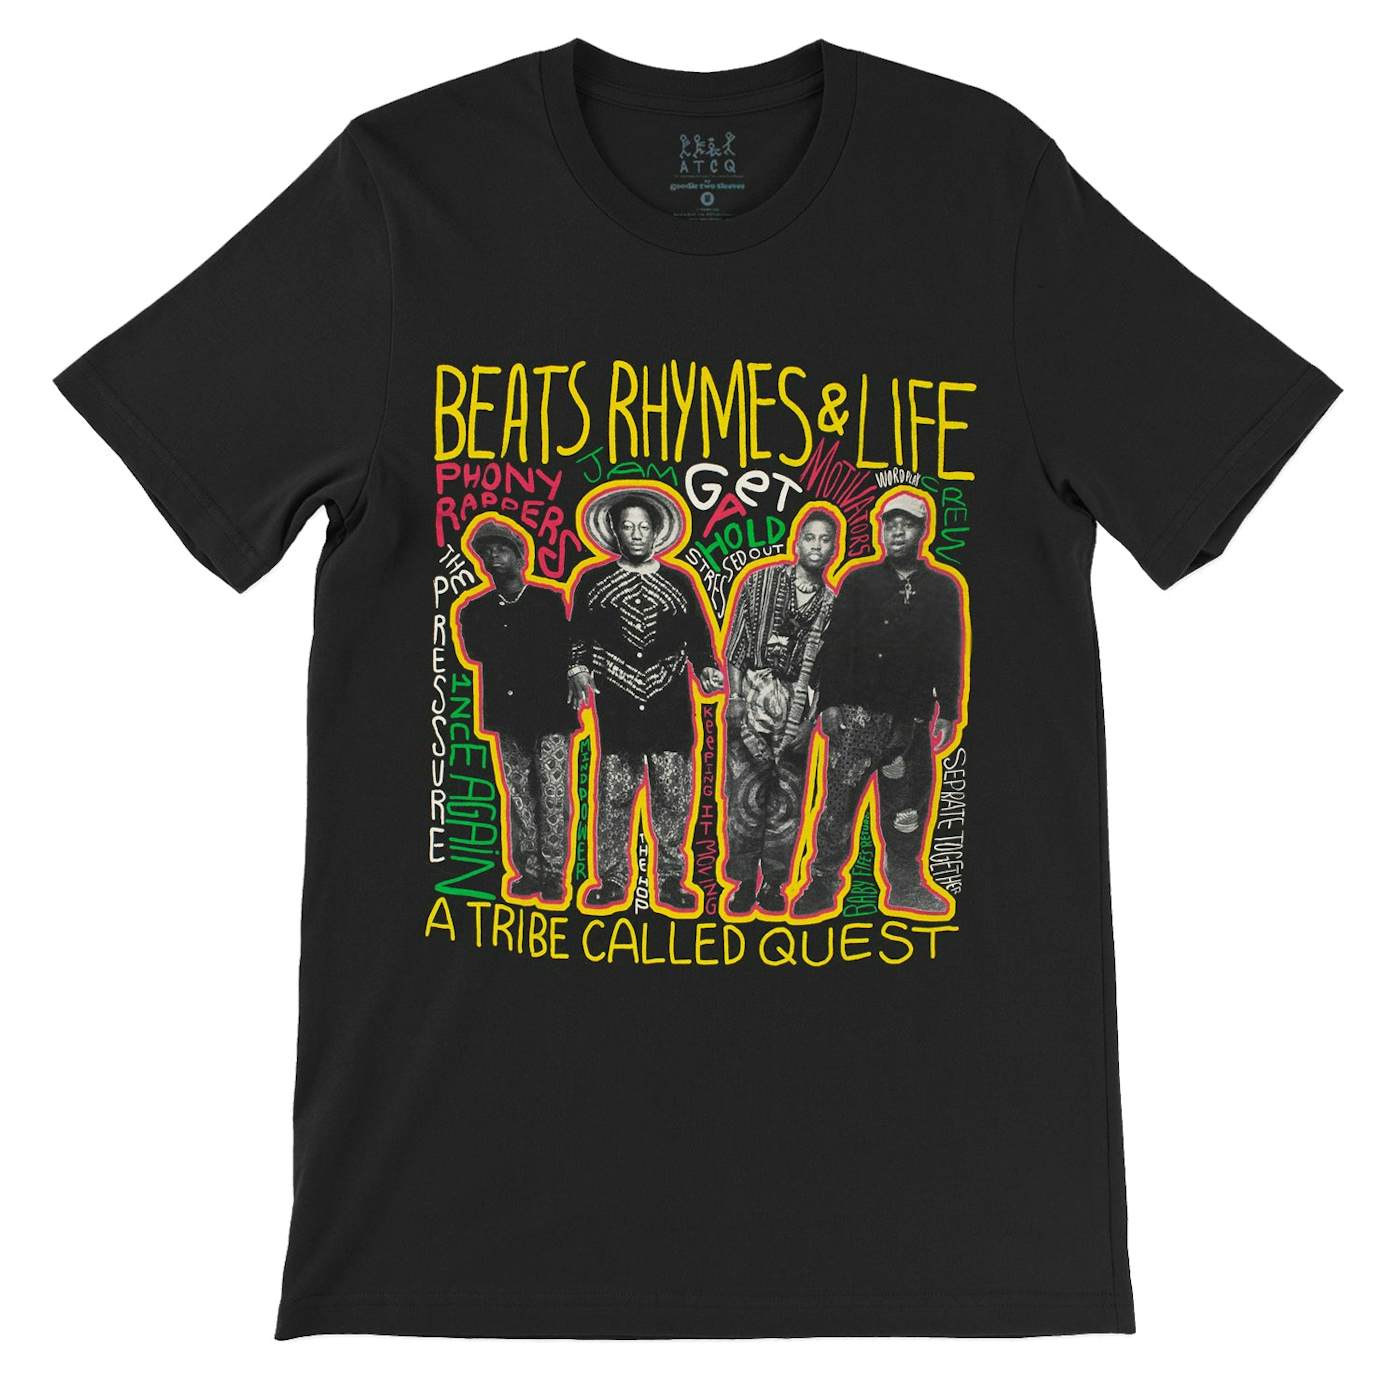 A Tribe Called Quest 'Beats Rhymes & Life' T-Shirt